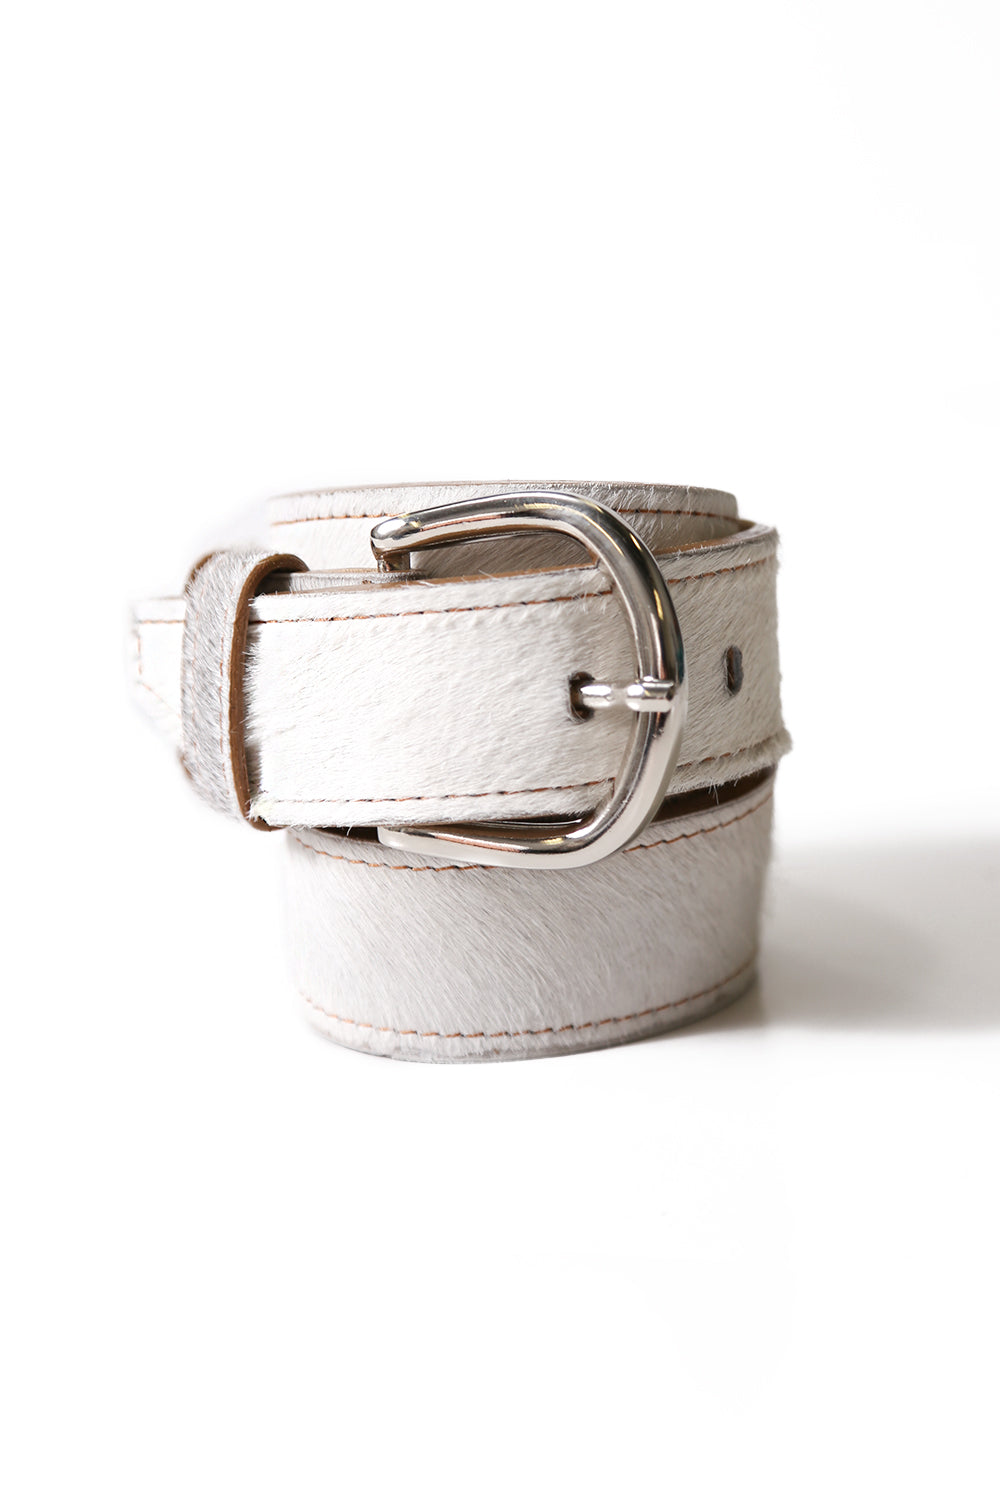 Jeans belt Natural Cowhide Leather